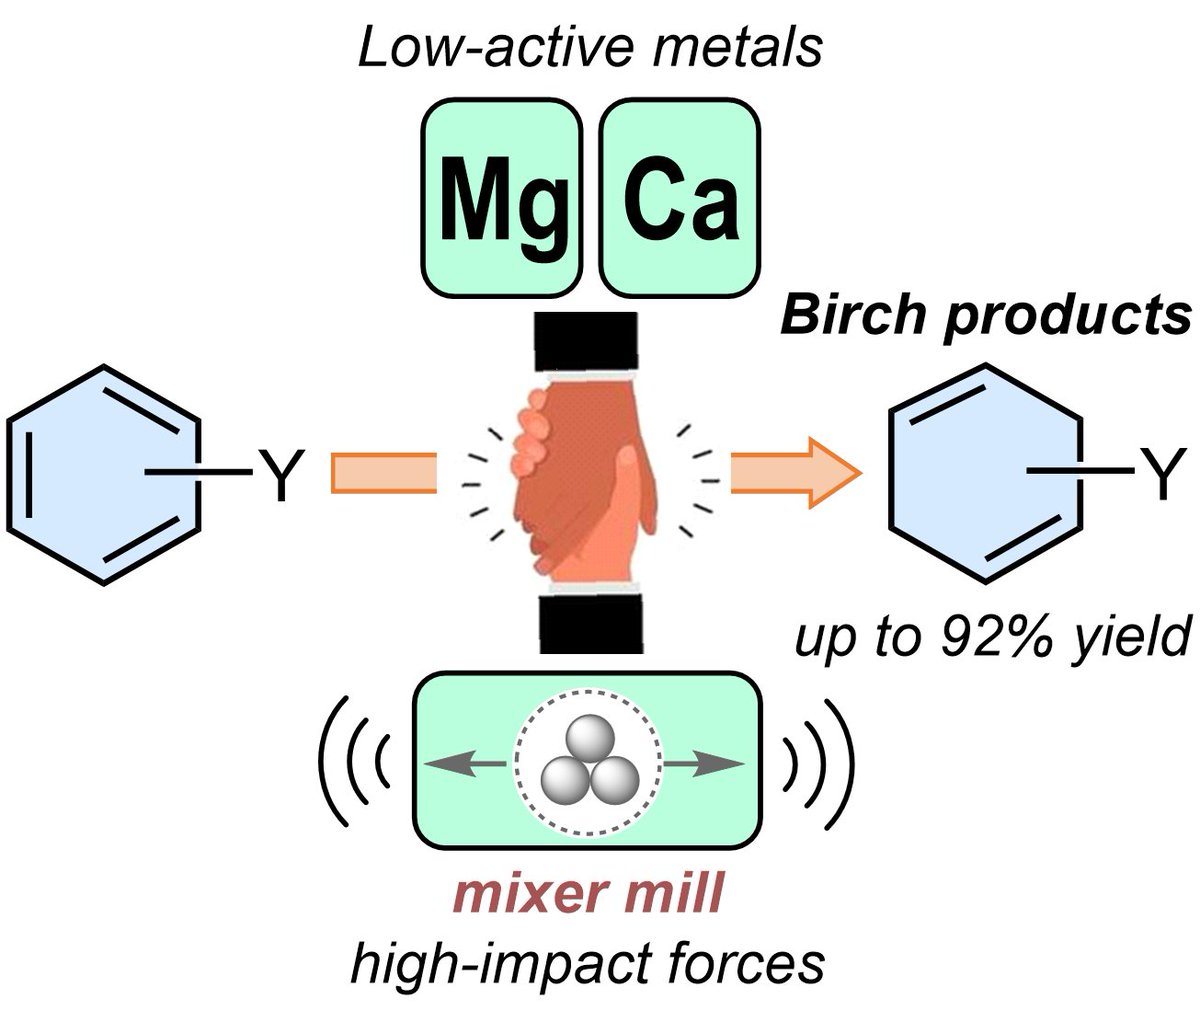 Struggling with alkali metals in Birch reduction? Facing a Li supply shortage? Our team @TallinnTech reports another #mechanochemistry breakthrough: using accessible Ca and Mg for Birch reductions. Just accepted in @angew_chem onlinelibrary.wiley.com/doi/10.1002/an… @RiinaAav @JagaNallaparaju